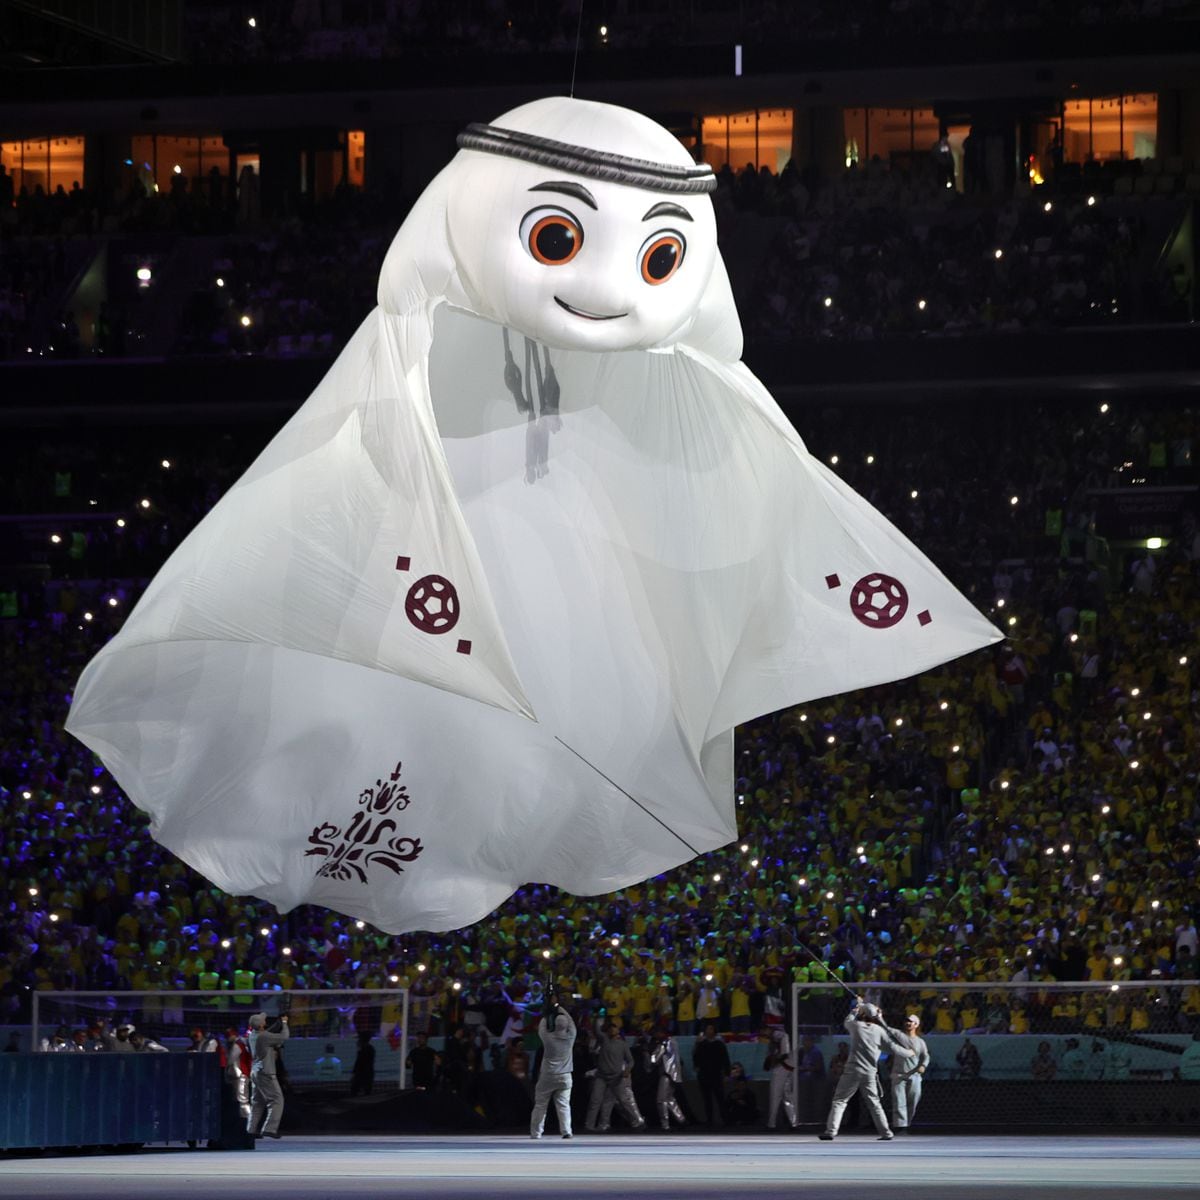 What is the official mascot for the Qatar 2022 World Cup? - AS USA